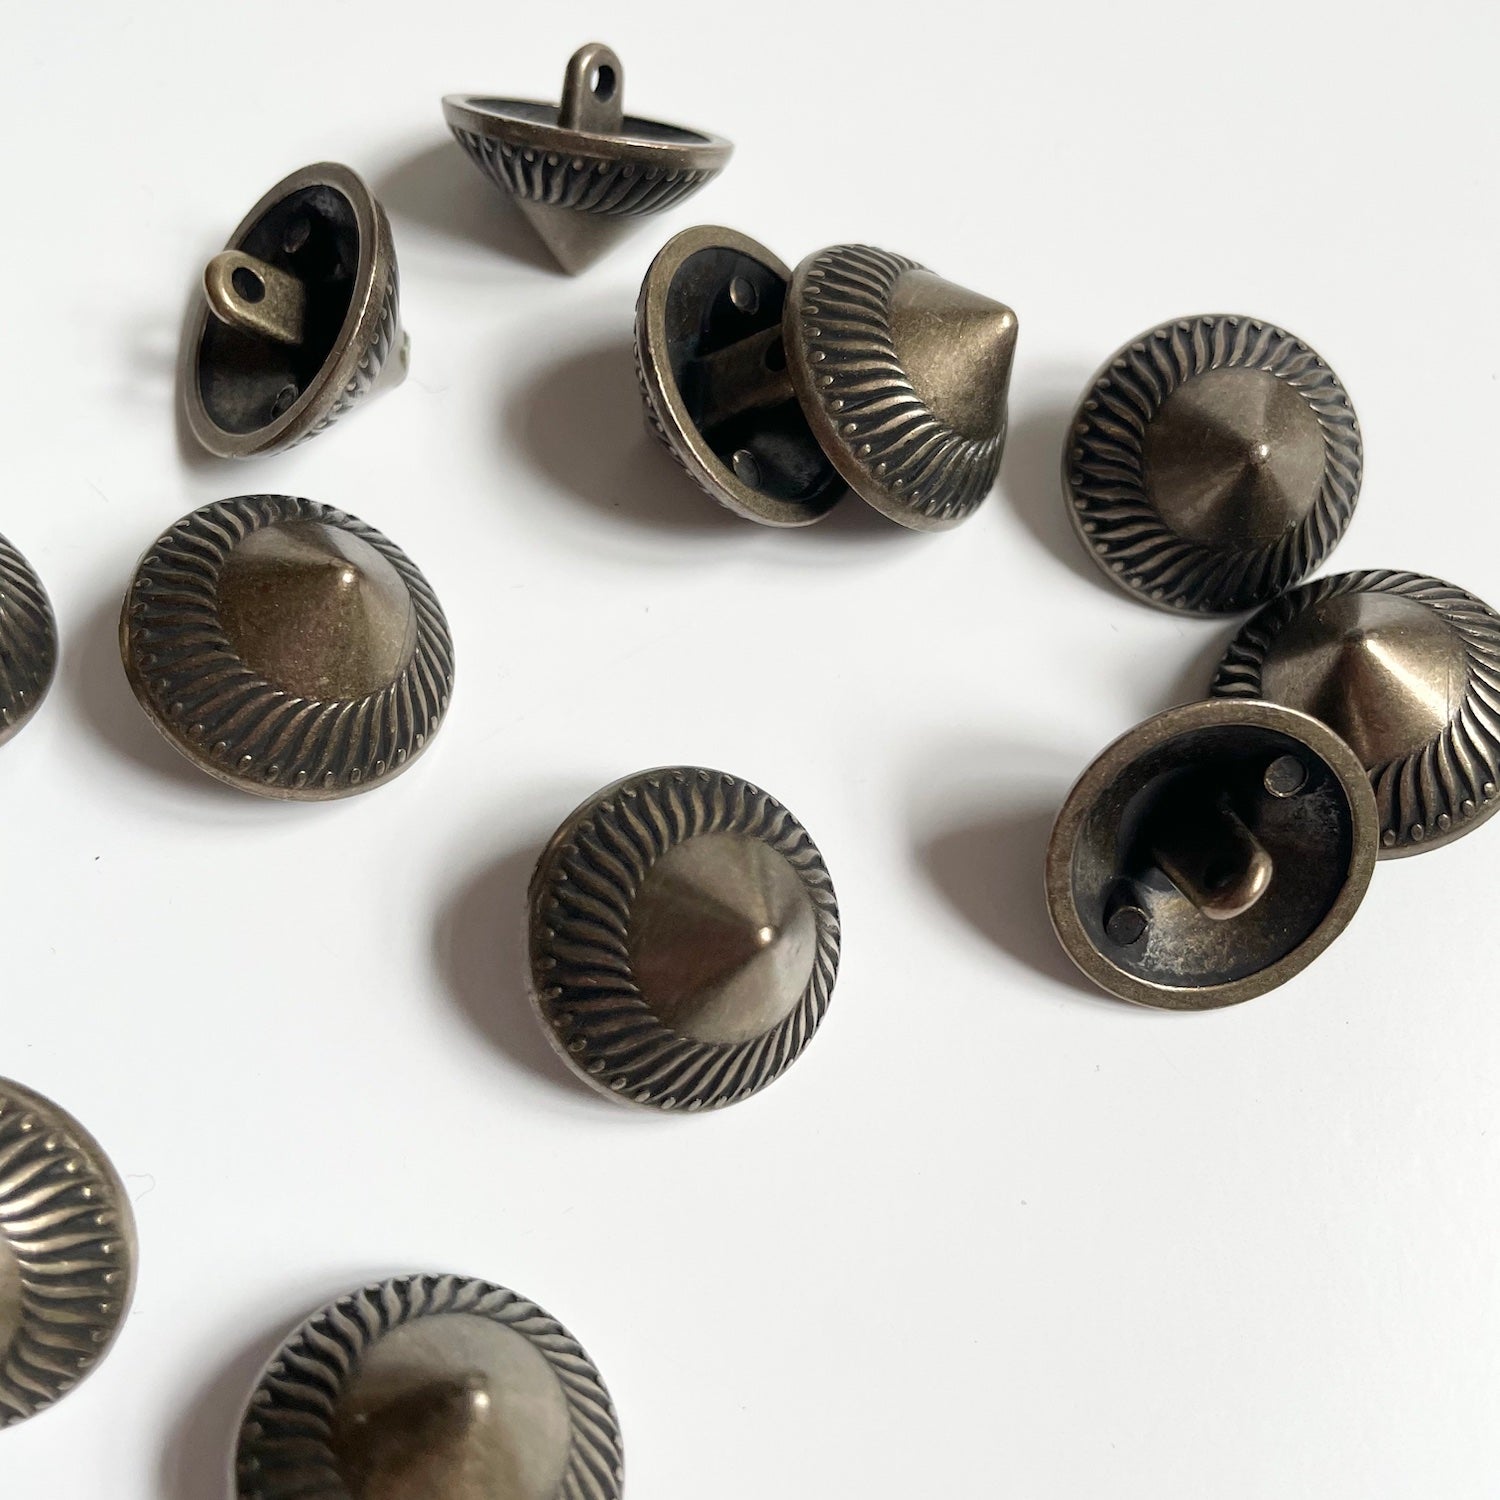 Vintage Brass Buttons, Antique Dimensional Jelly Mold Centers, Loop Shank,  Set of 6 Pressed Brass Button Sewing Notions 